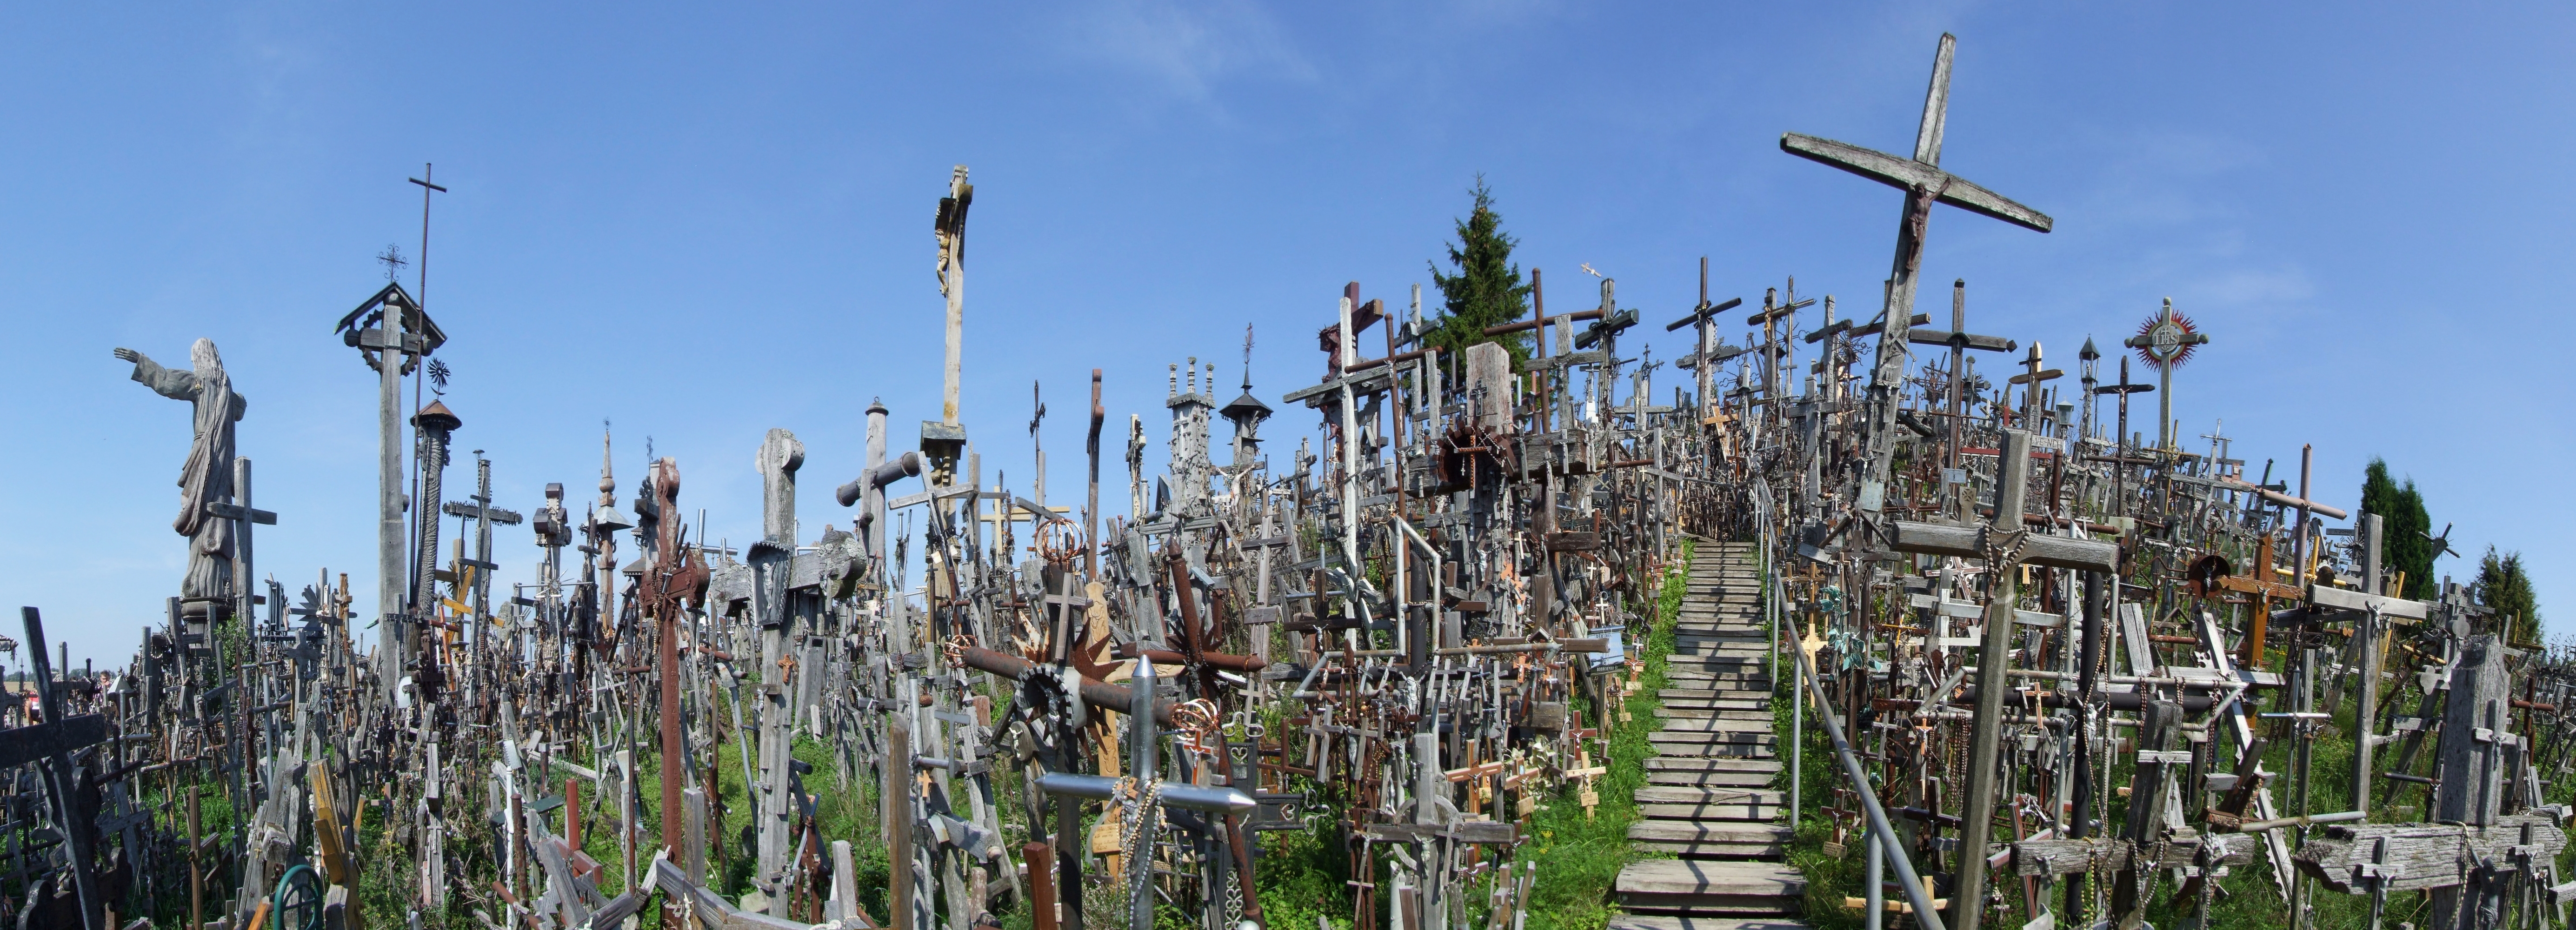 A Monumental View: The Hill of Three Crosses